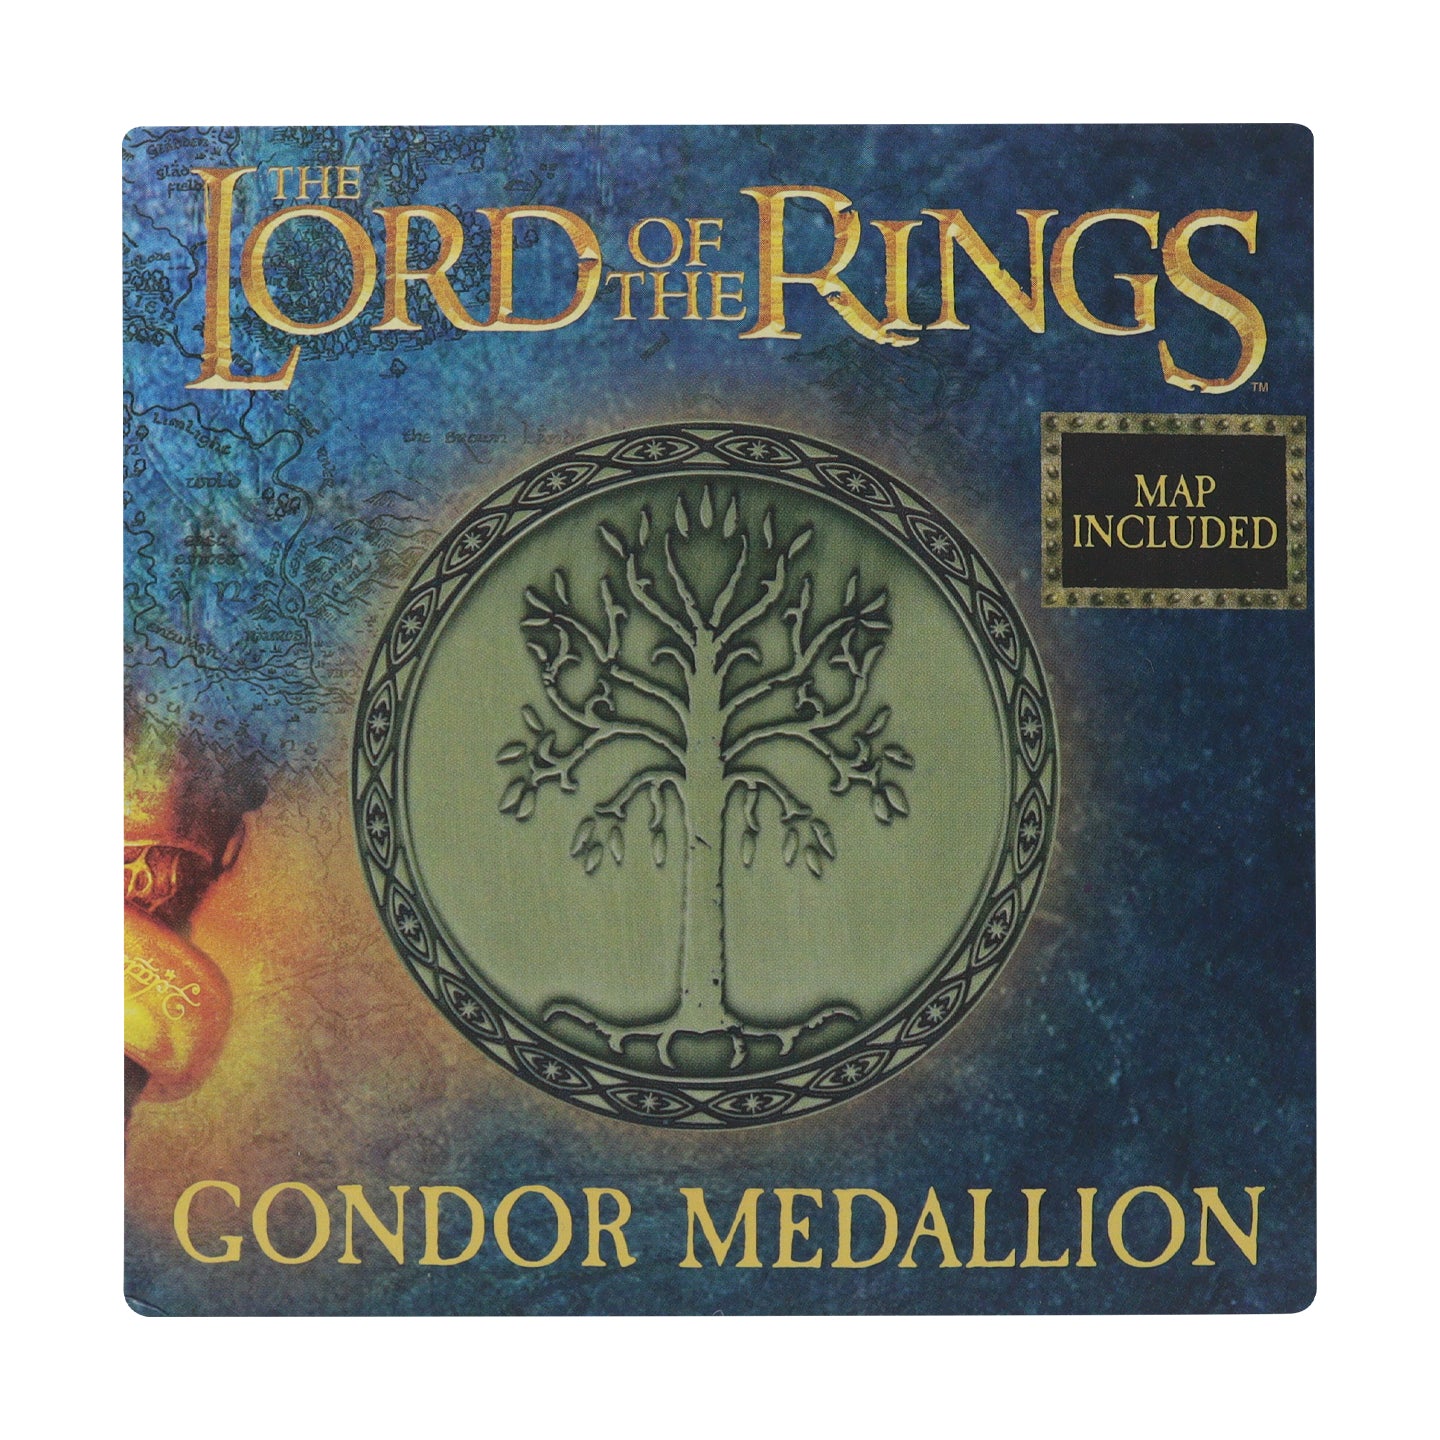 The Lord of the Rings Limited Edition Gondor Medallion